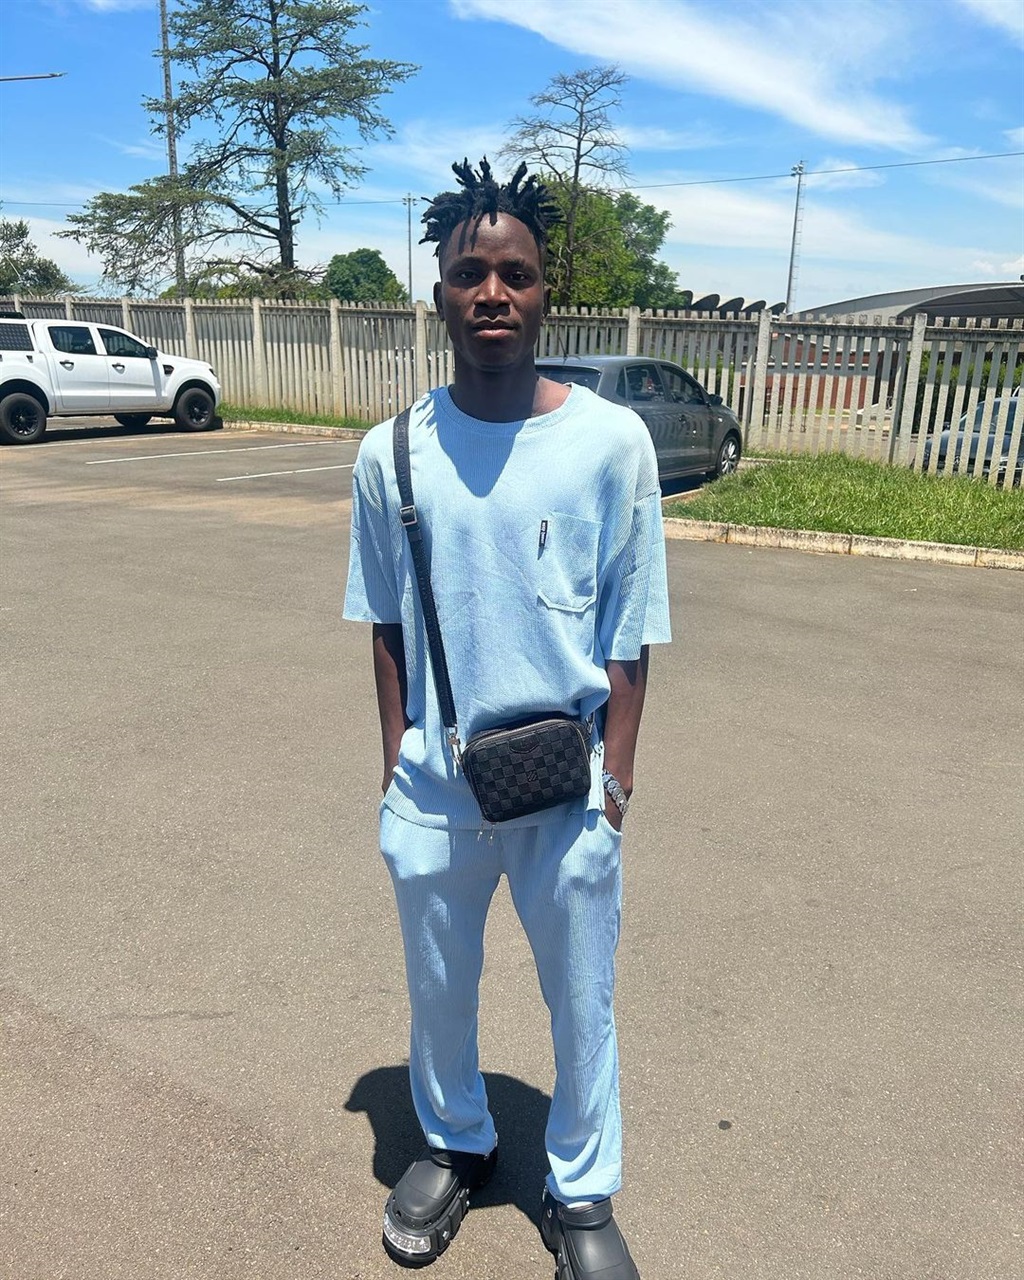 Orlando Pirates youngster flaunted a pricey Goyard bag on Instagram before watching his country, DR Congo take on Bafana Bafana at the Orlando Stadium.